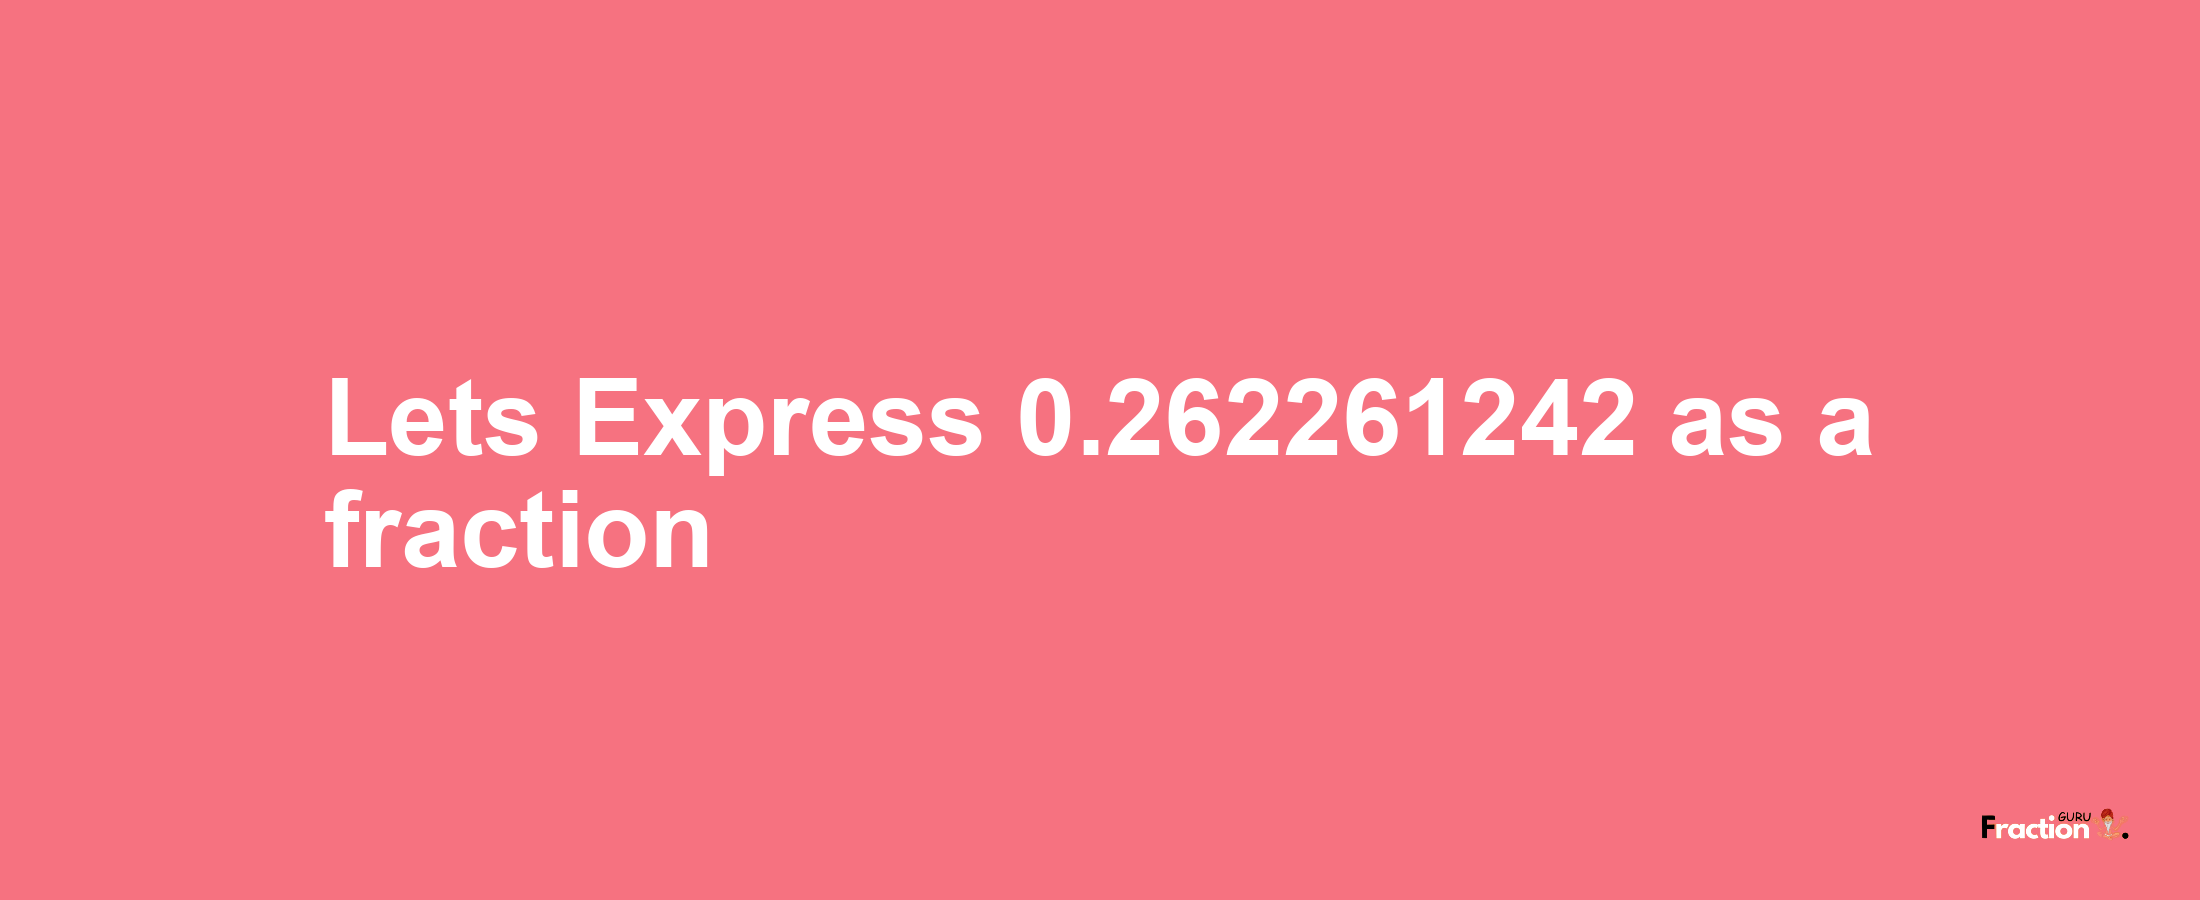 Lets Express 0.262261242 as afraction